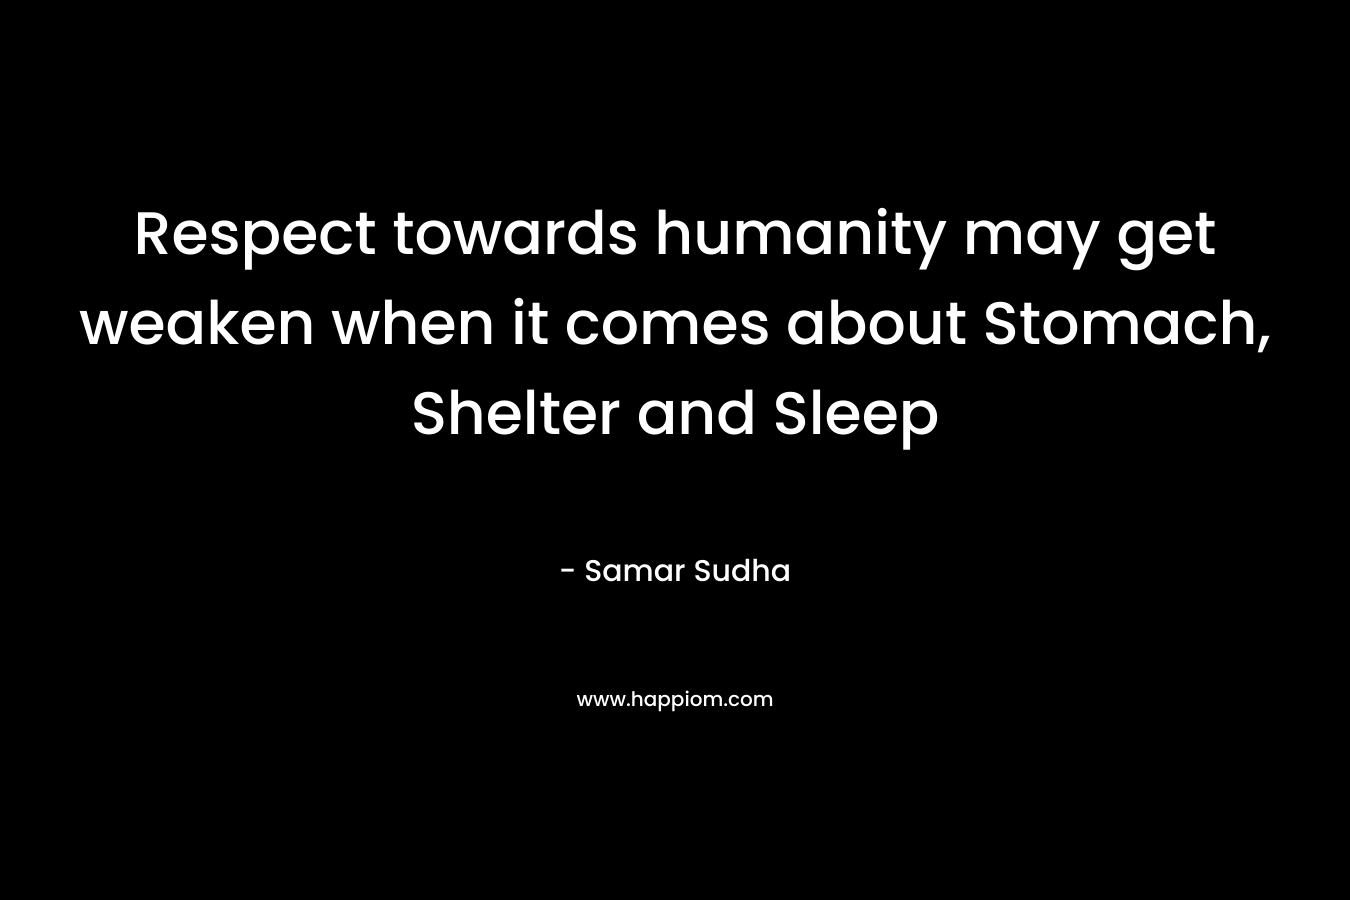 Respect towards humanity may get weaken when it comes about Stomach, Shelter and Sleep